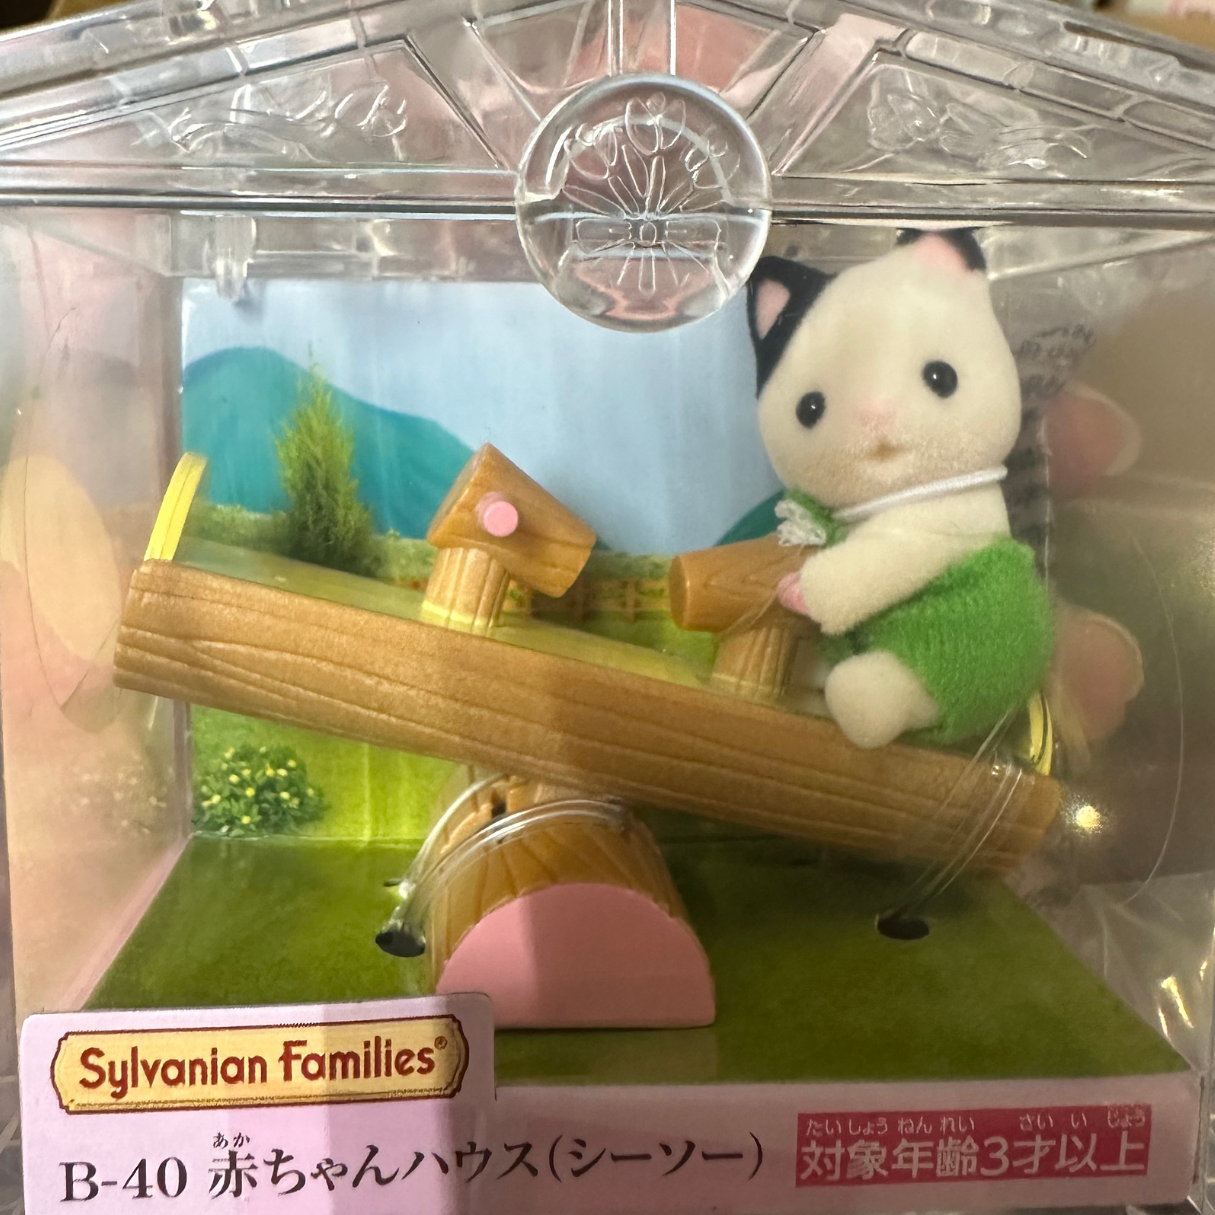 Calico Critter Sylvanian Families Baby House Series (8 Types)